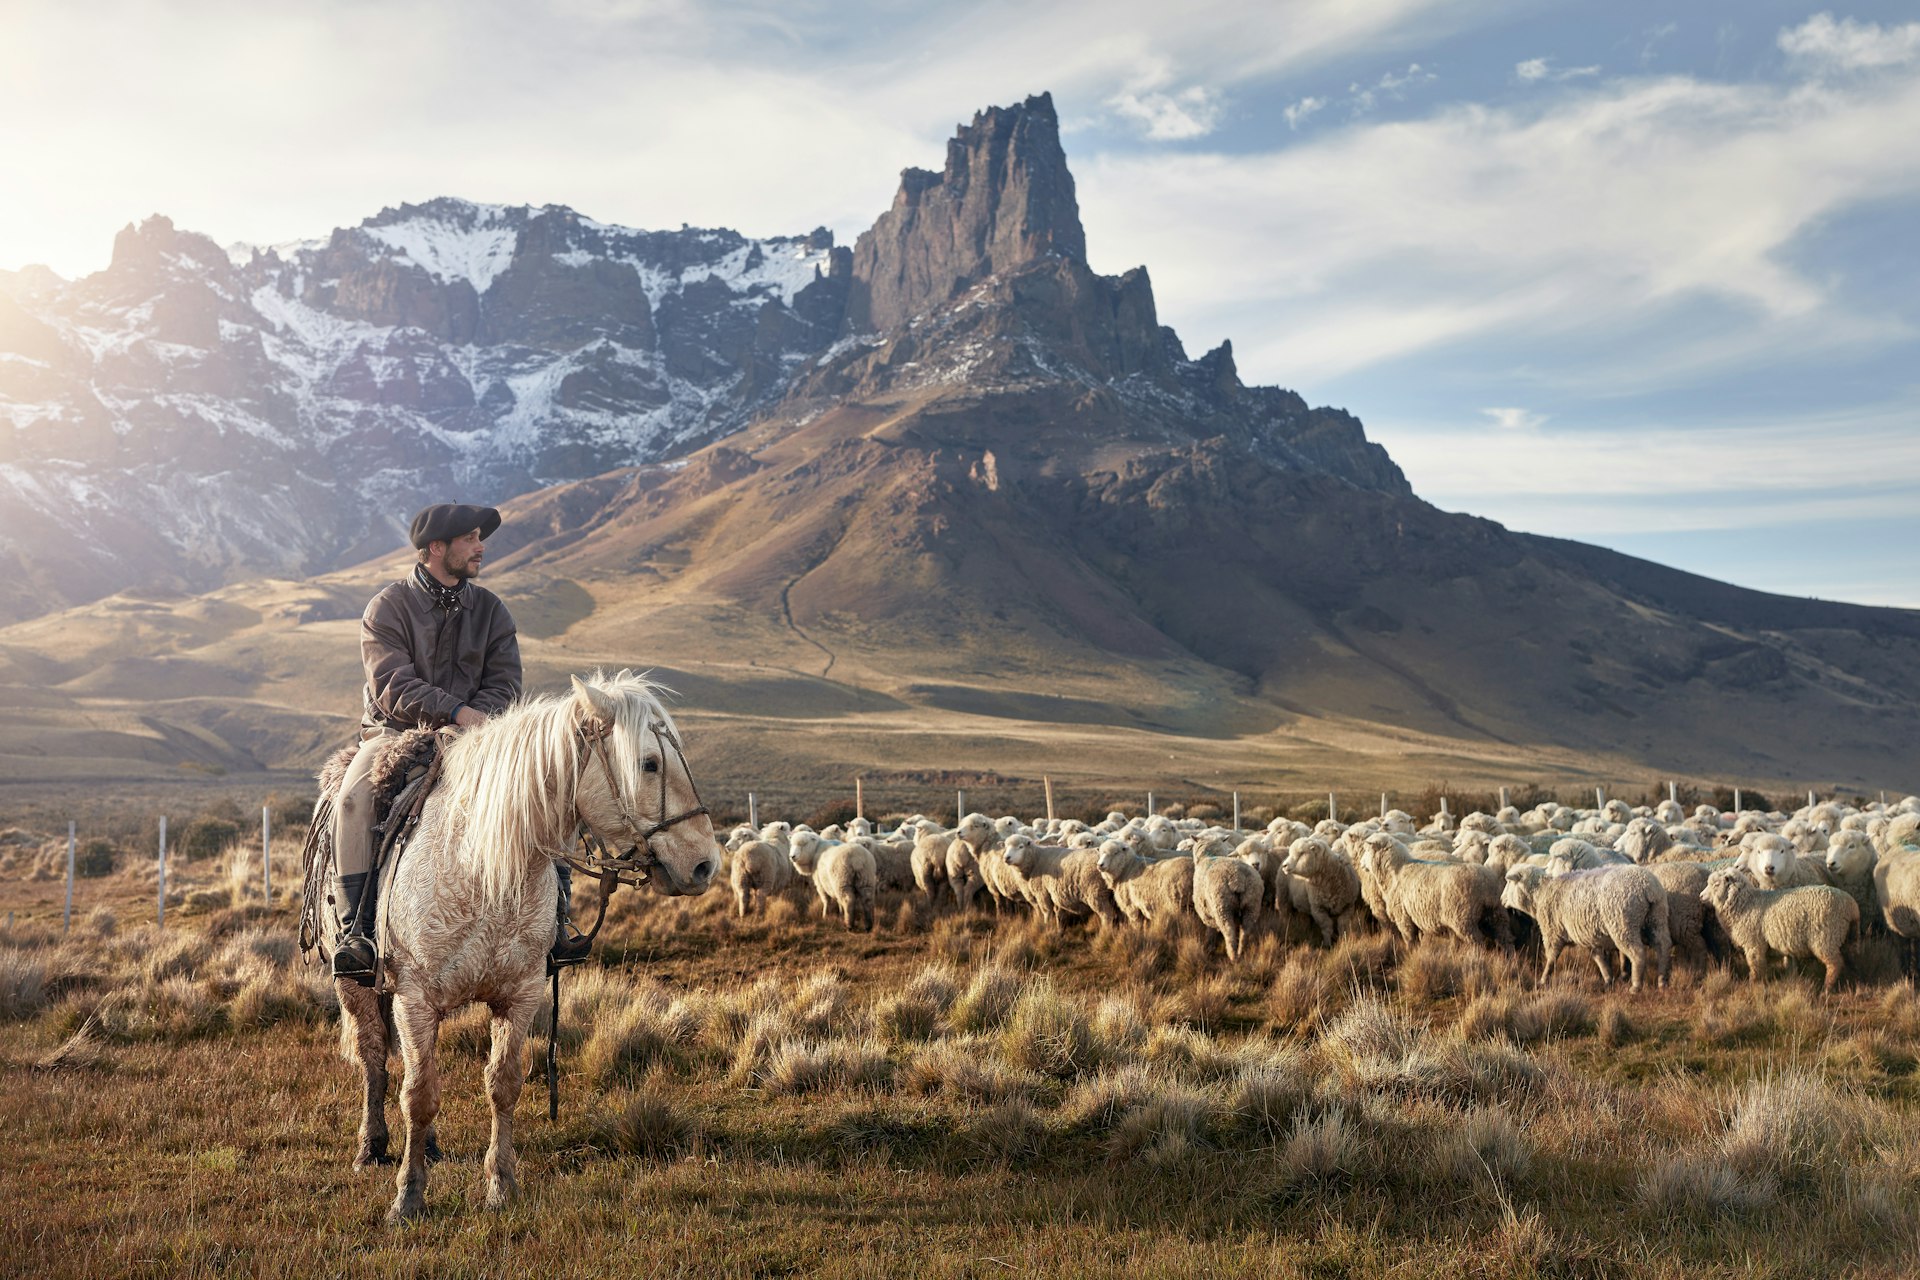 A gaucho/cowboy sits on a horse gazing out at a flock of sheep on plains at the foot of jagged mountains